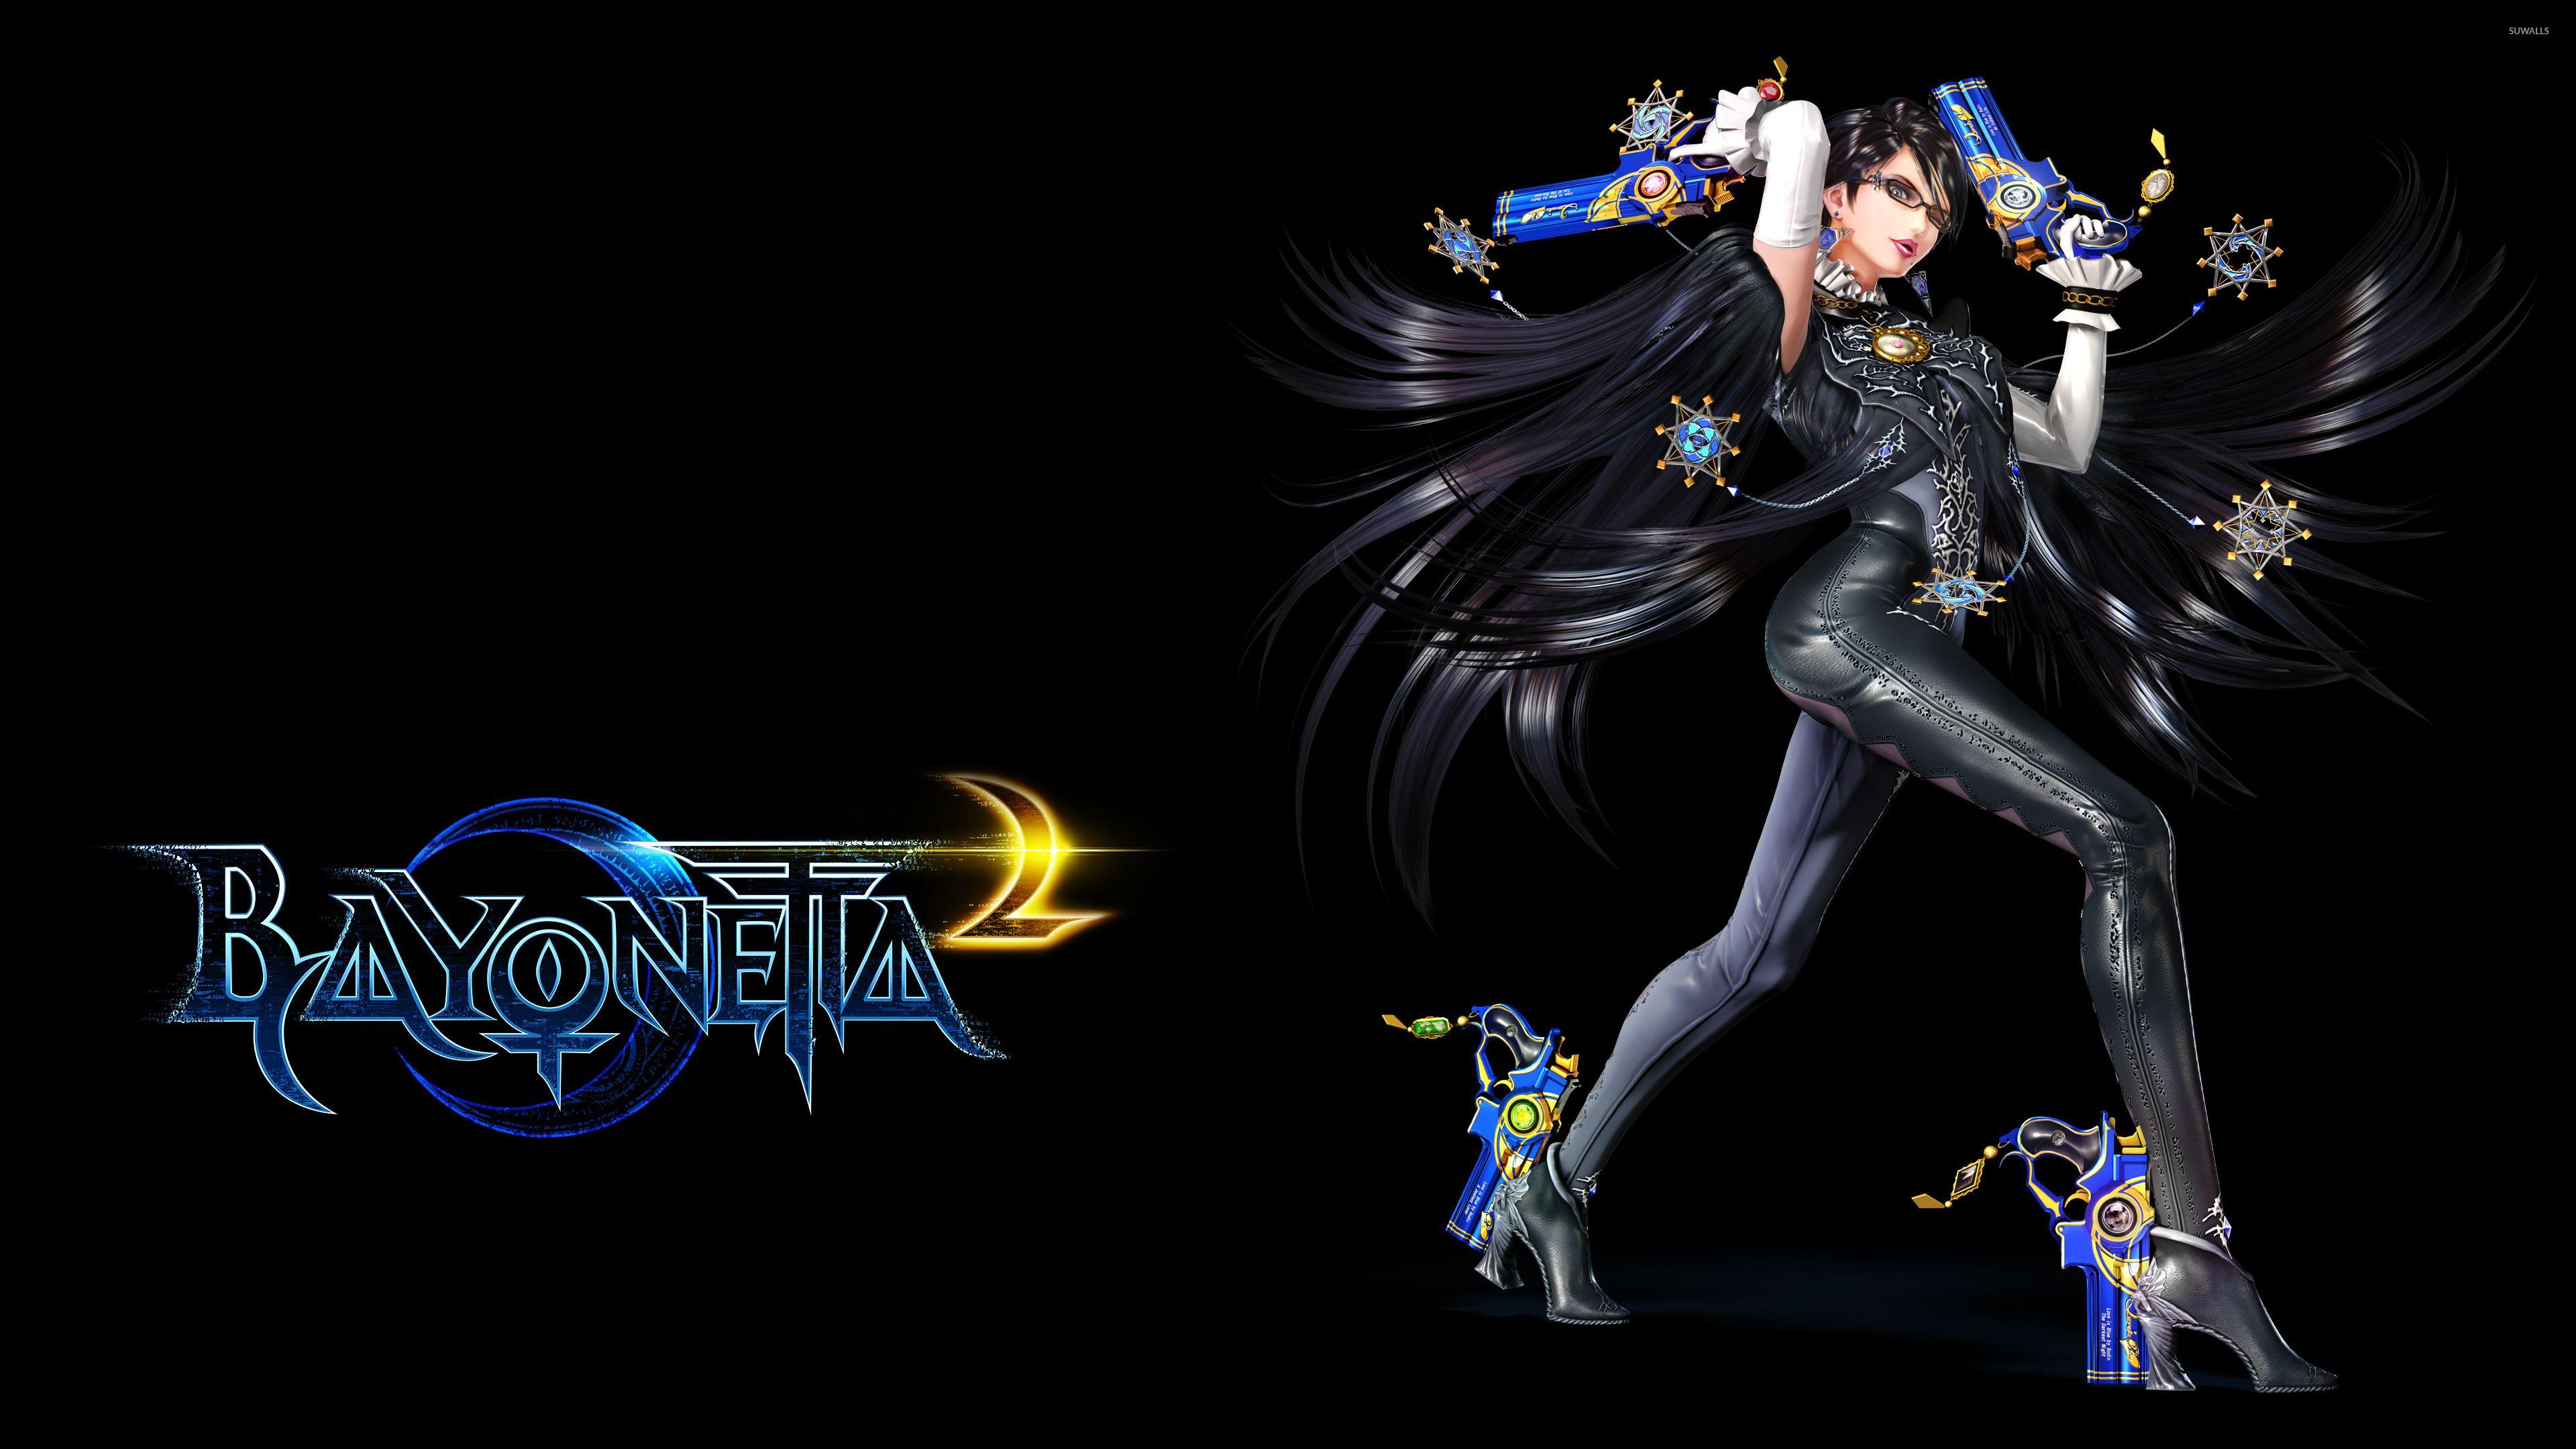 Bayonetta 3 Wallpapers (35+ images inside)